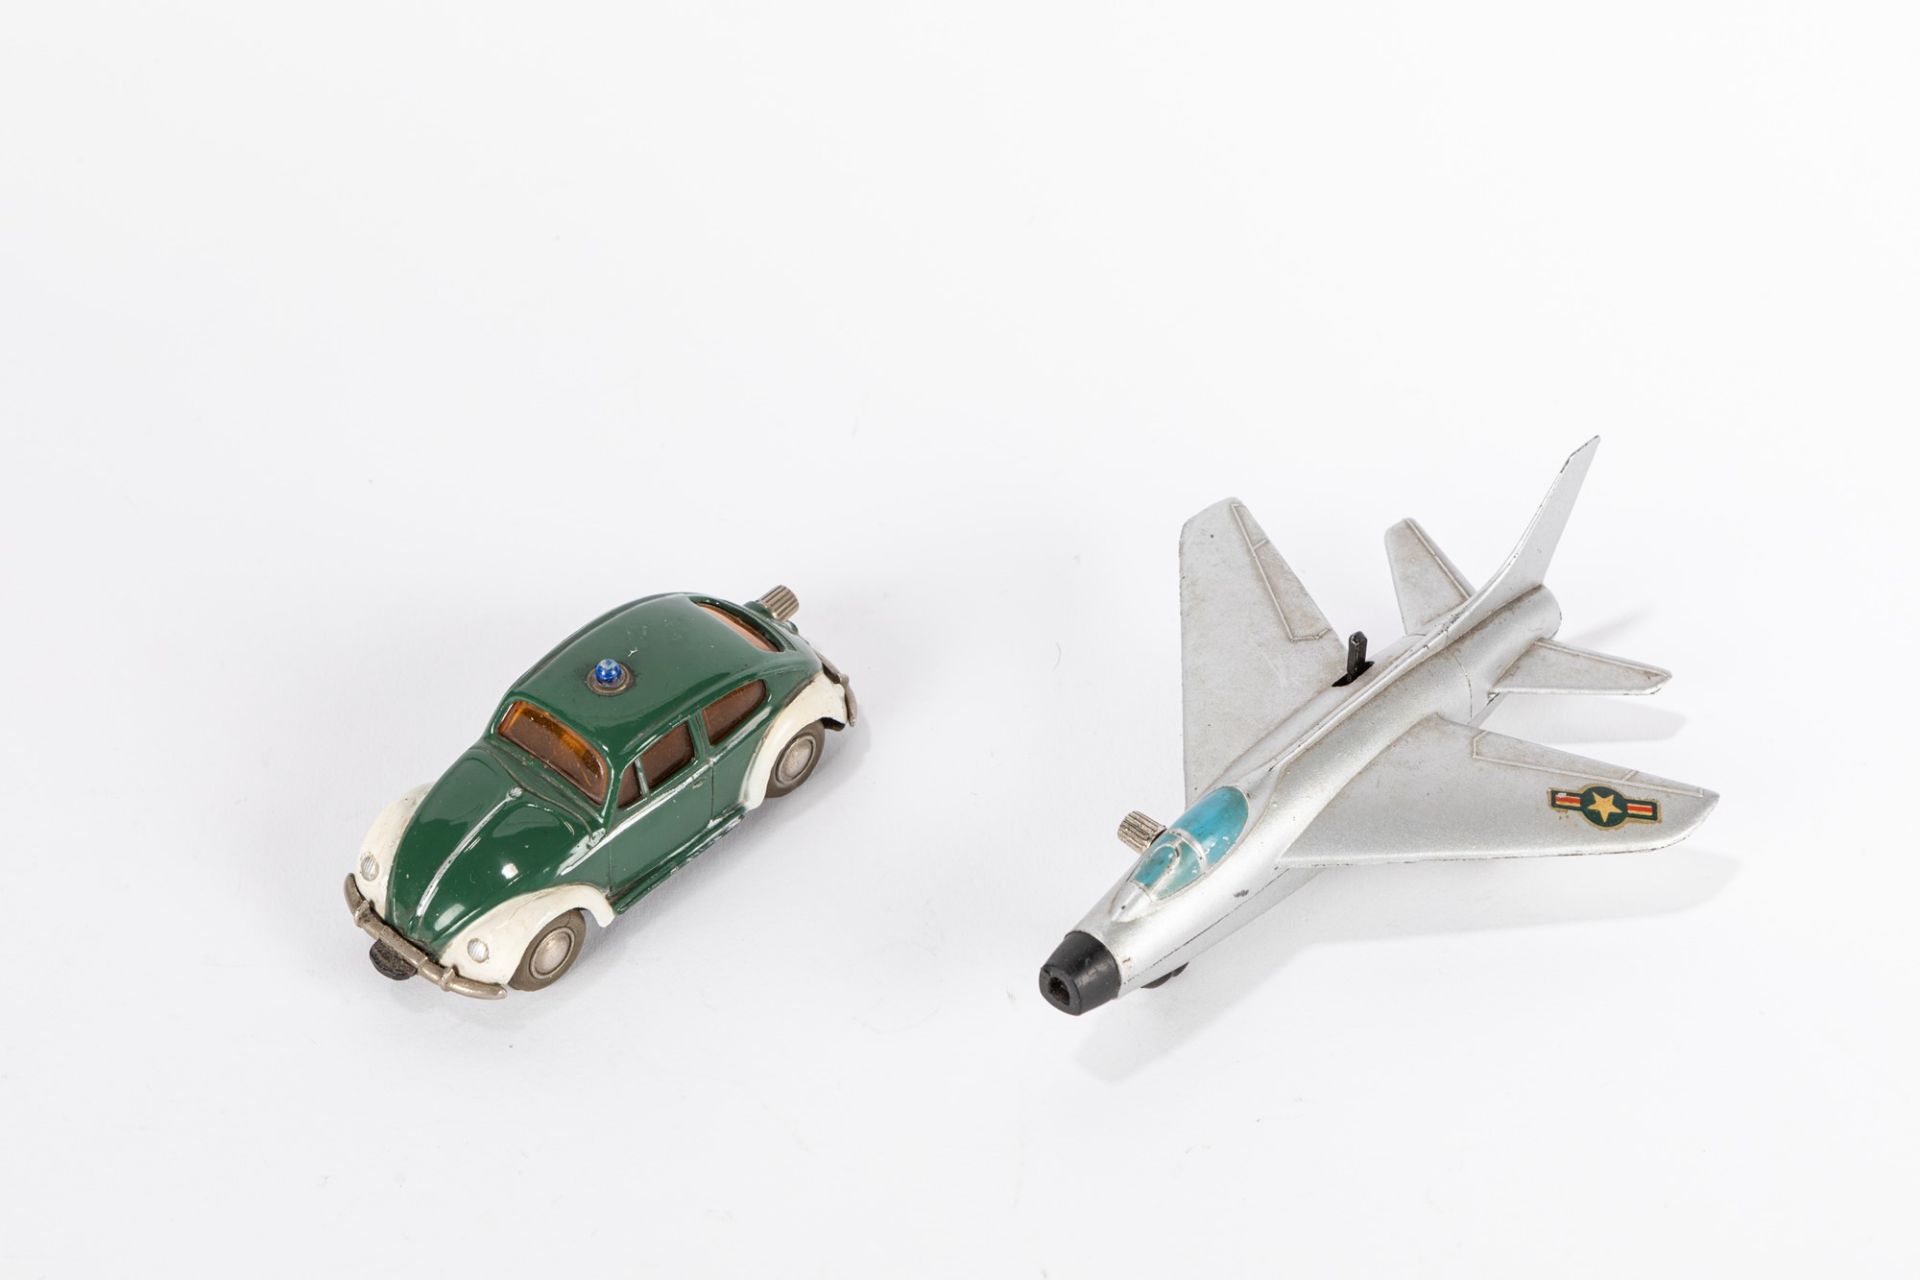 Schuco - 2 Micr-Racer: model 1046 Volkswager and model 1032 Micro Jet - Image 2 of 2